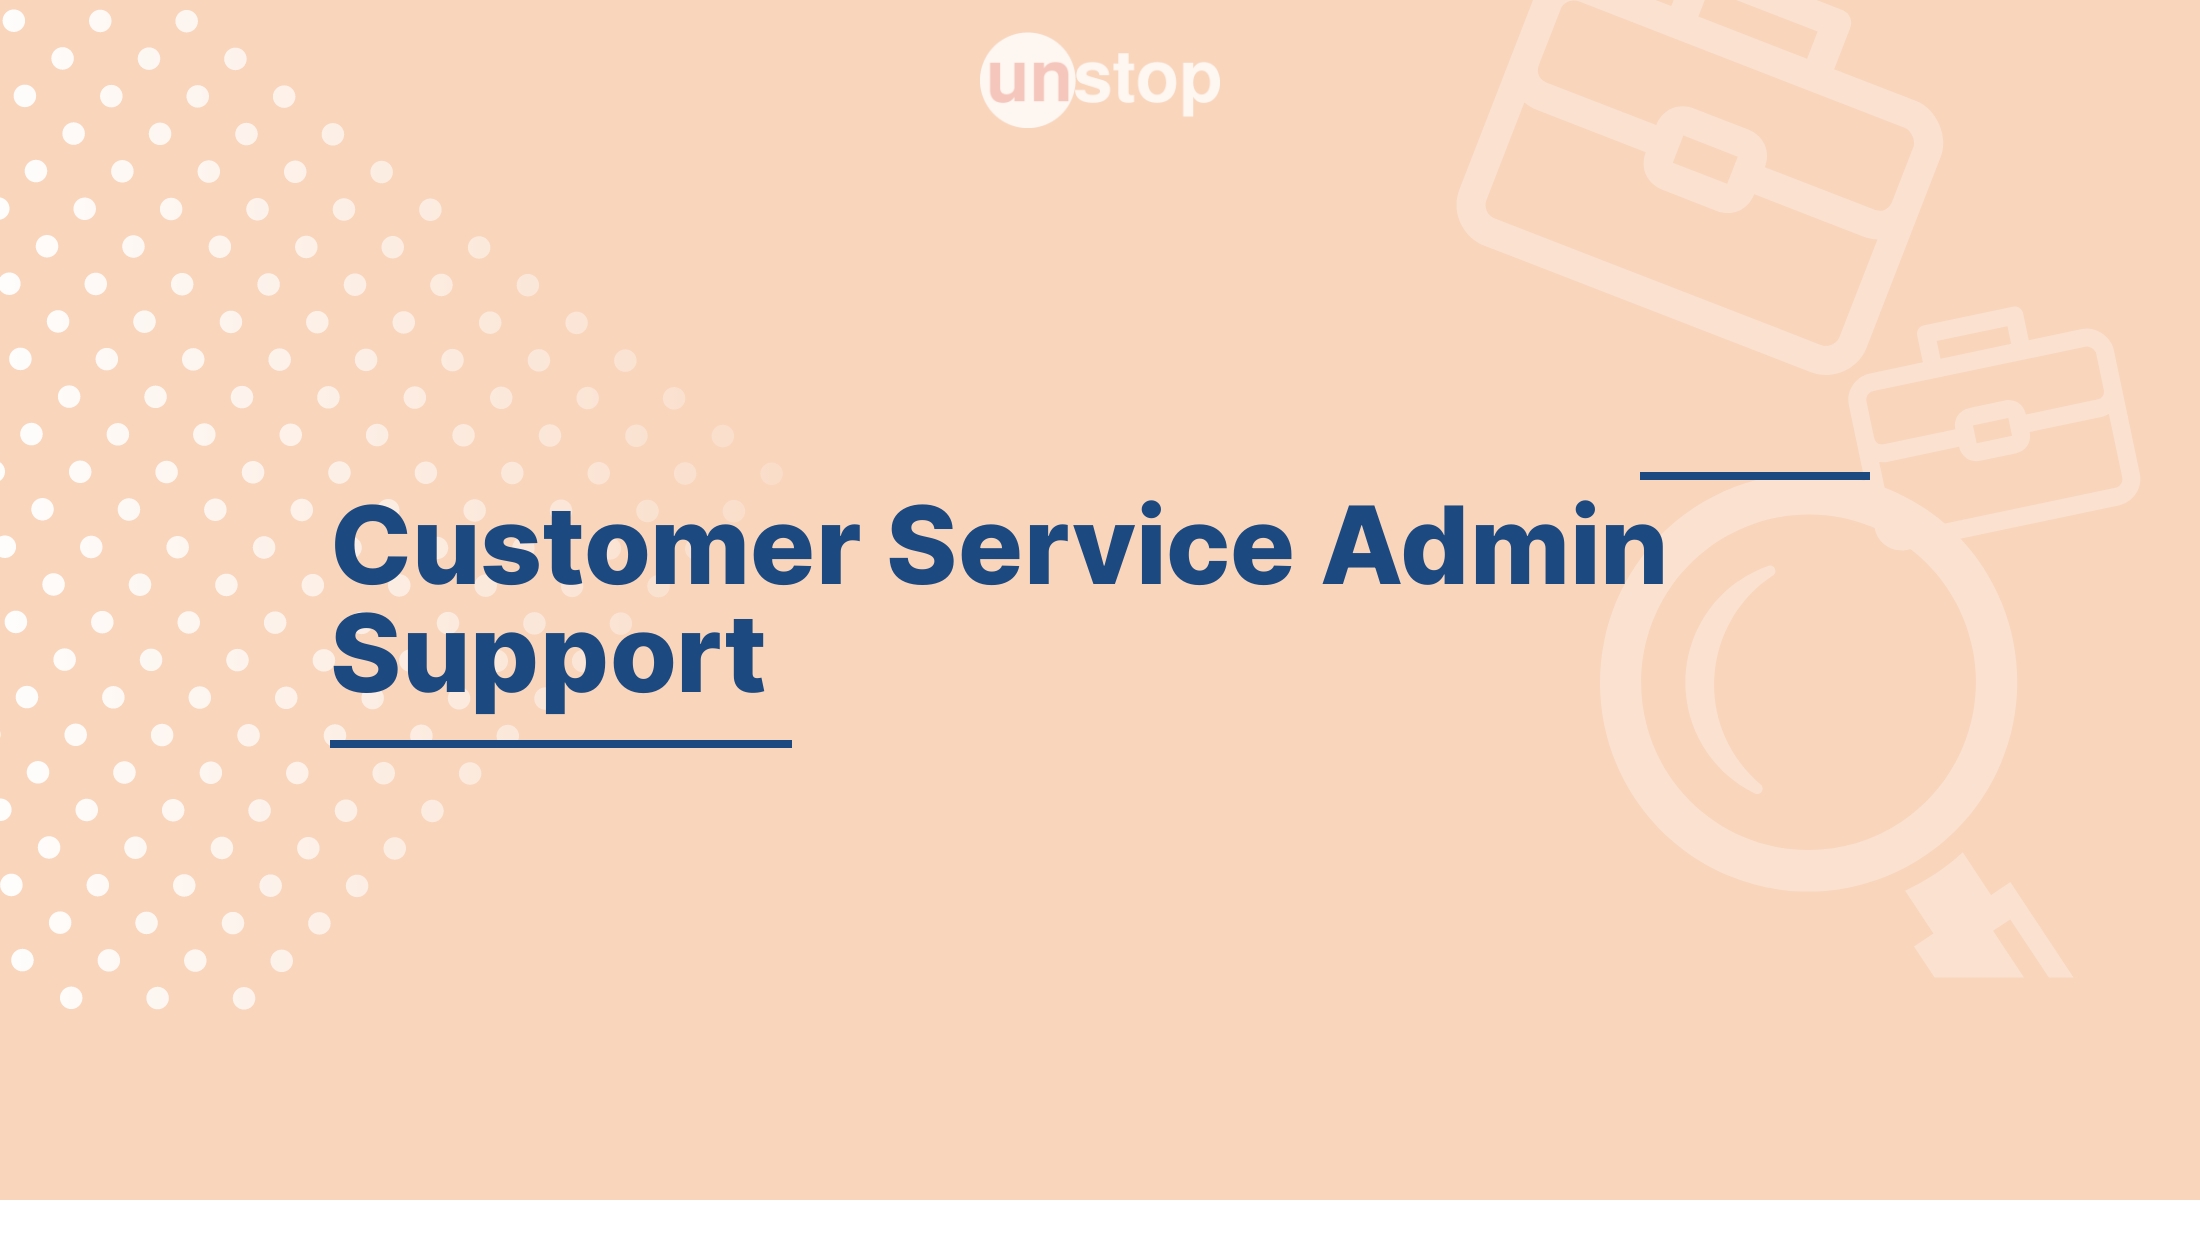 Customer Service Admin Support by Oracle! // Unstop